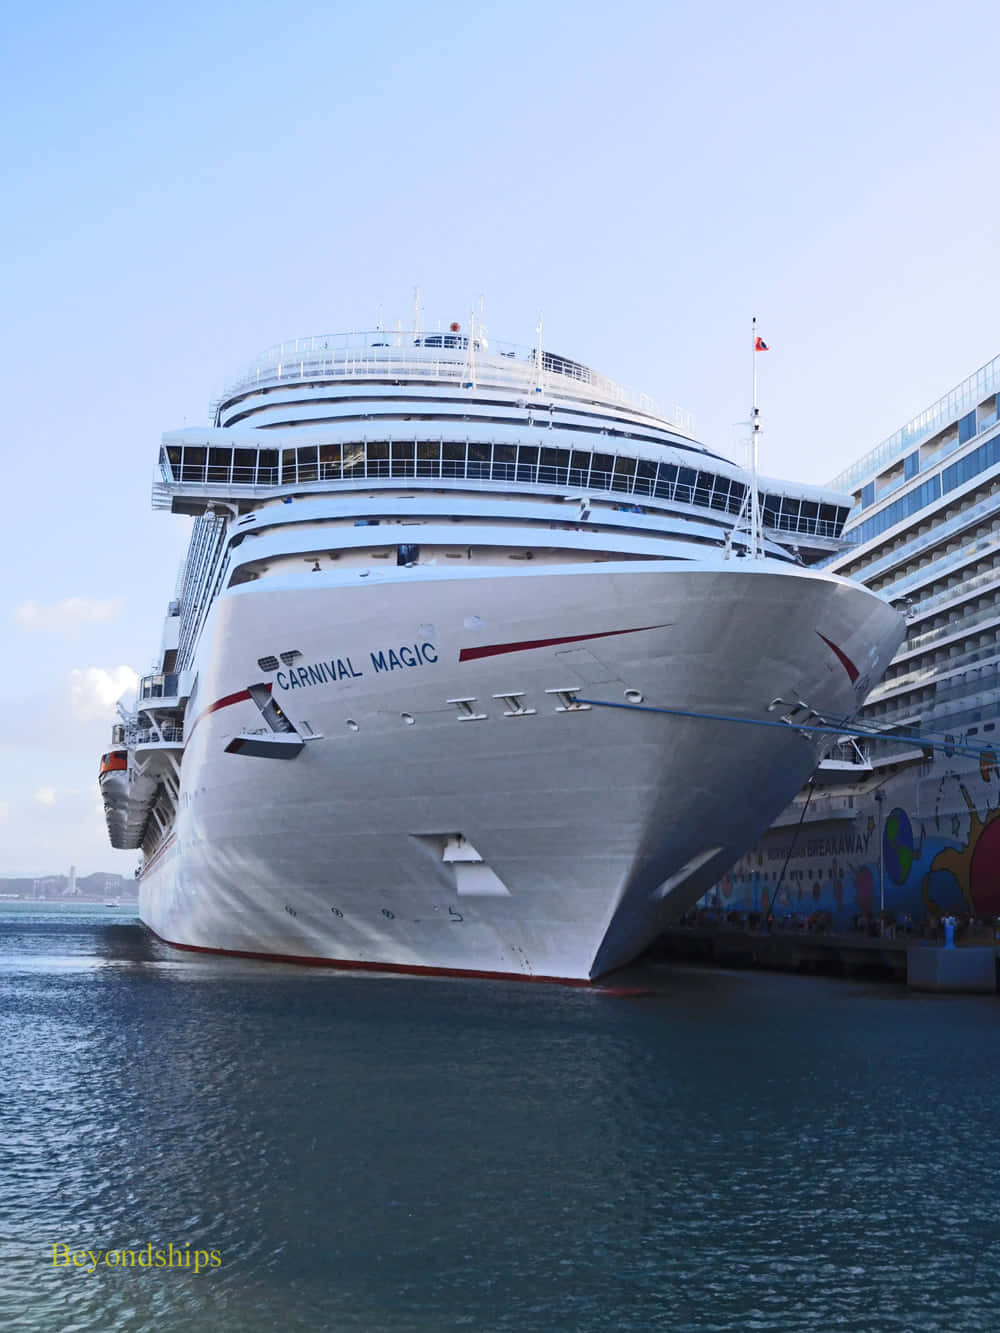 Take a cruise on the Carnival Magic, an unforgettable adventure!